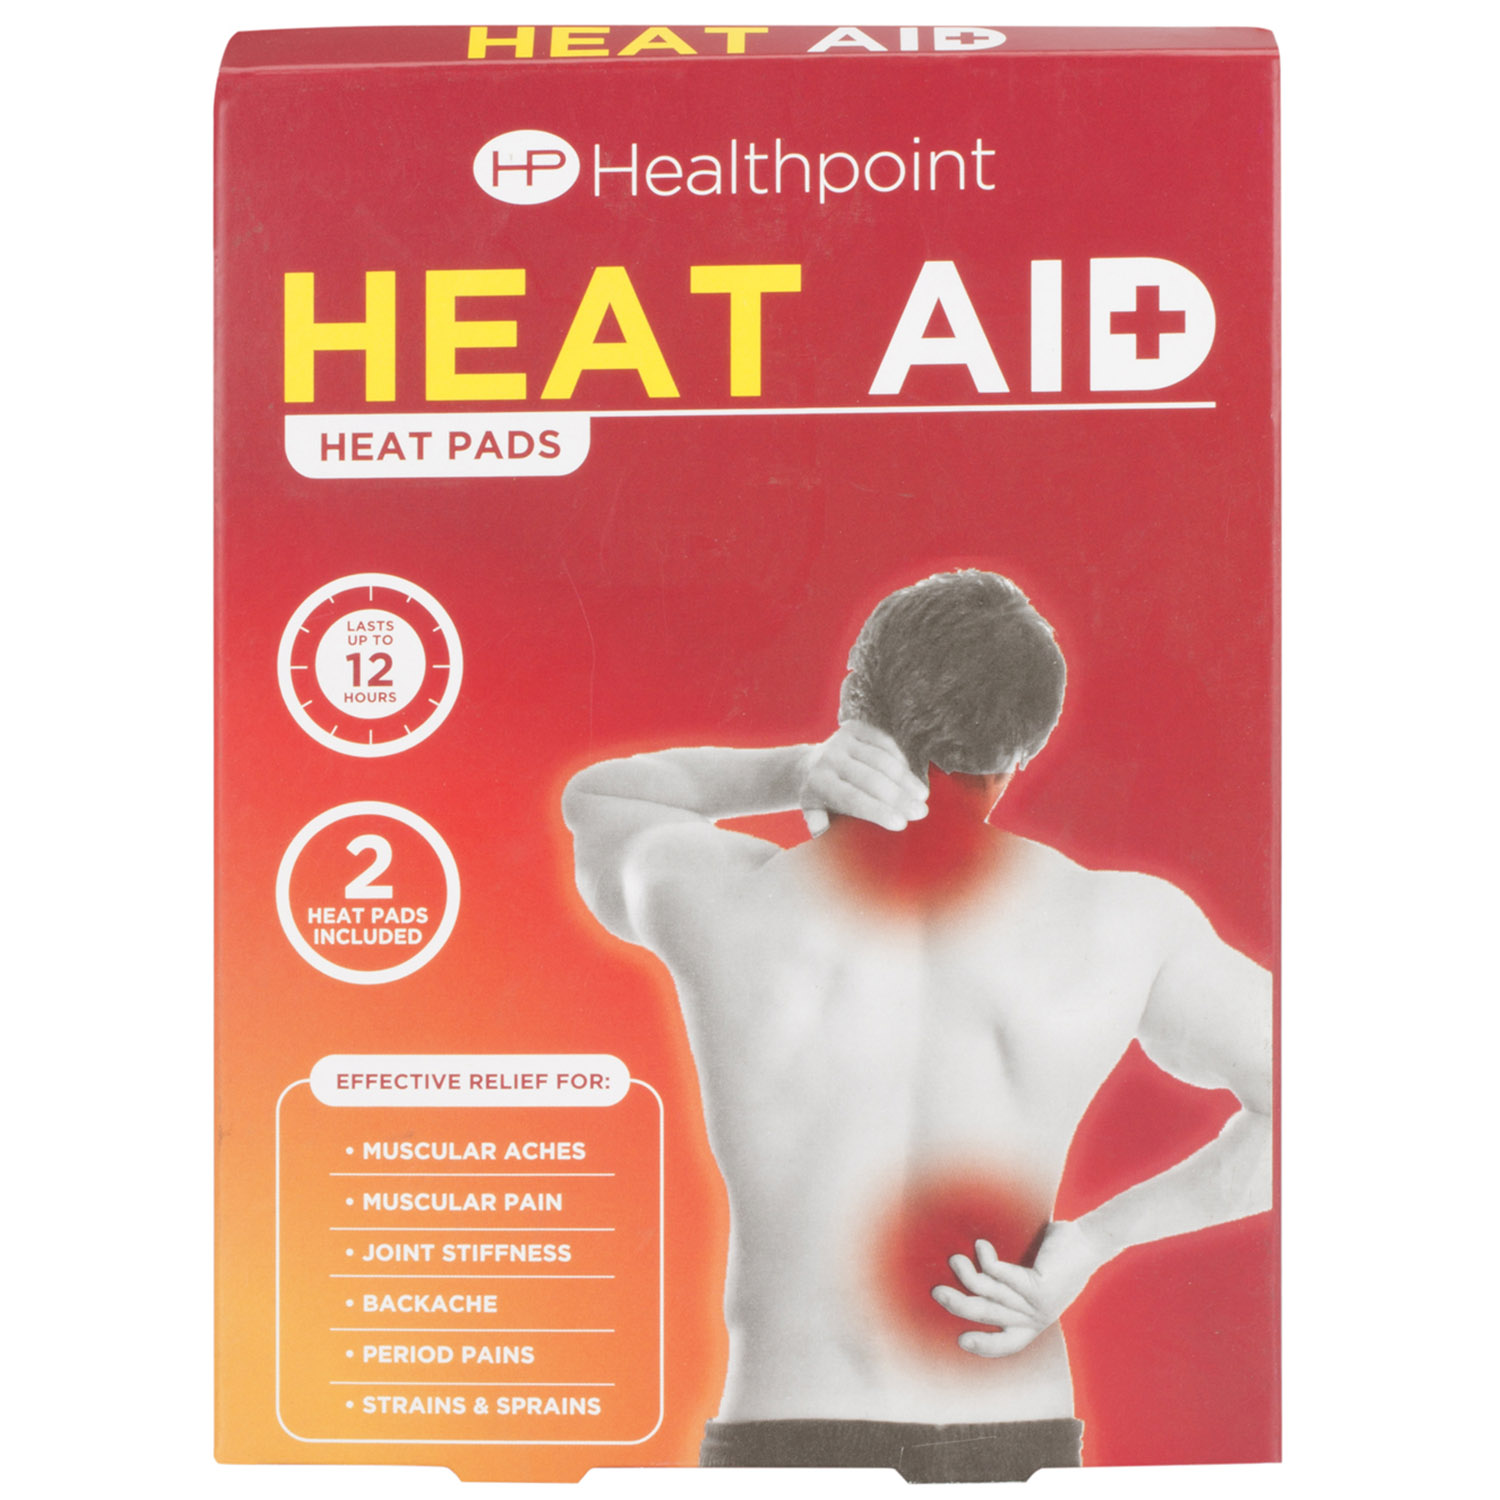 Healthpoint Heat Aid Pain Relief Pad 2 Pack Image